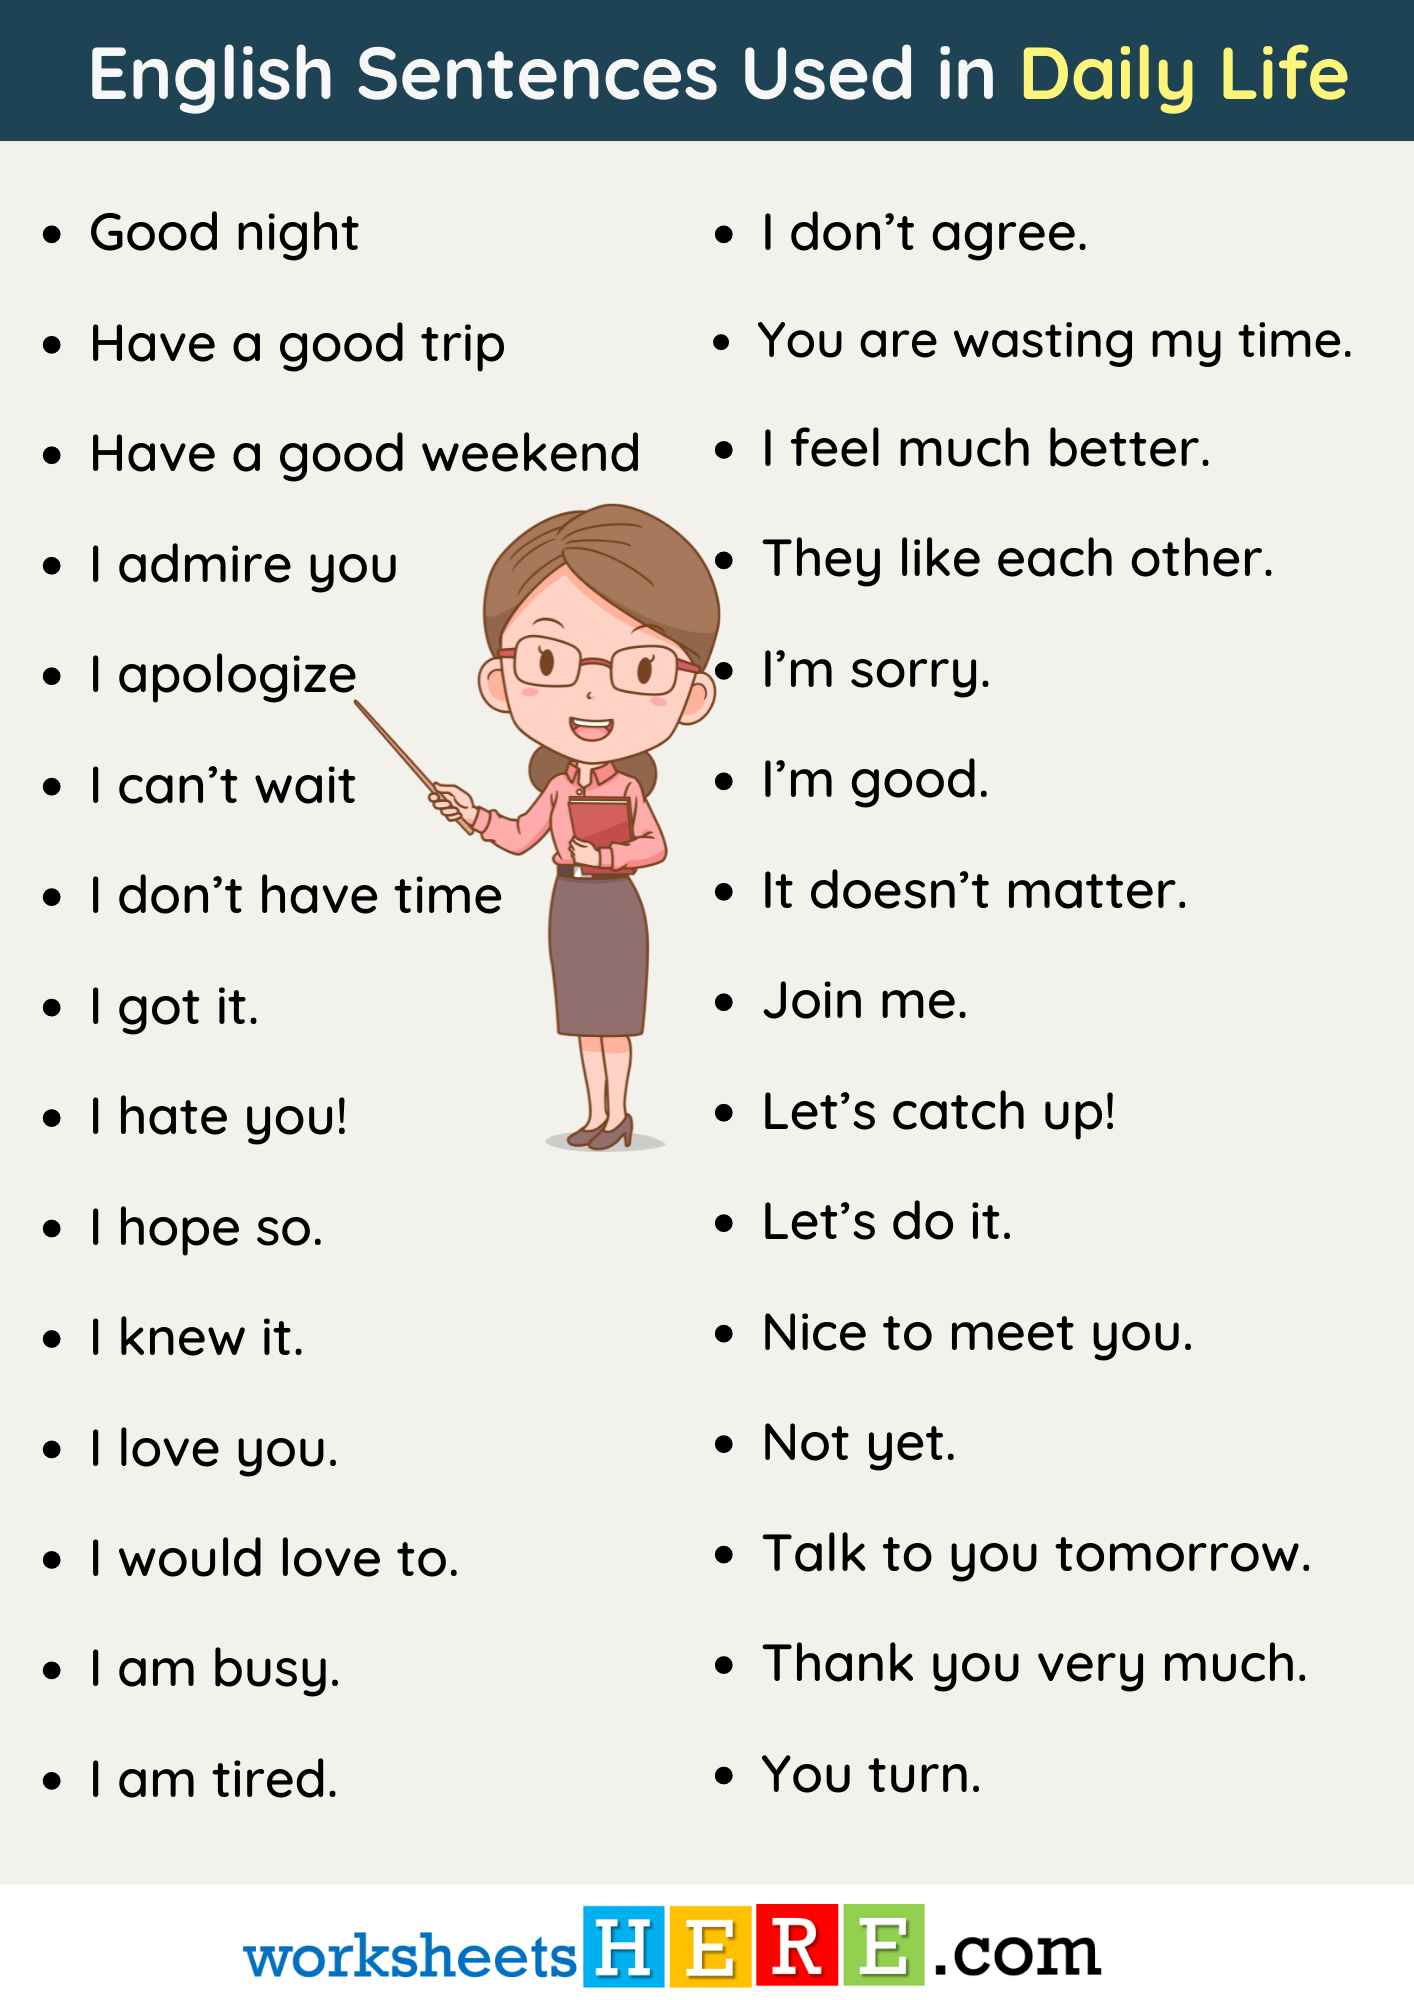 English Sentences Used in Daily Life PDF Worksheet For Students